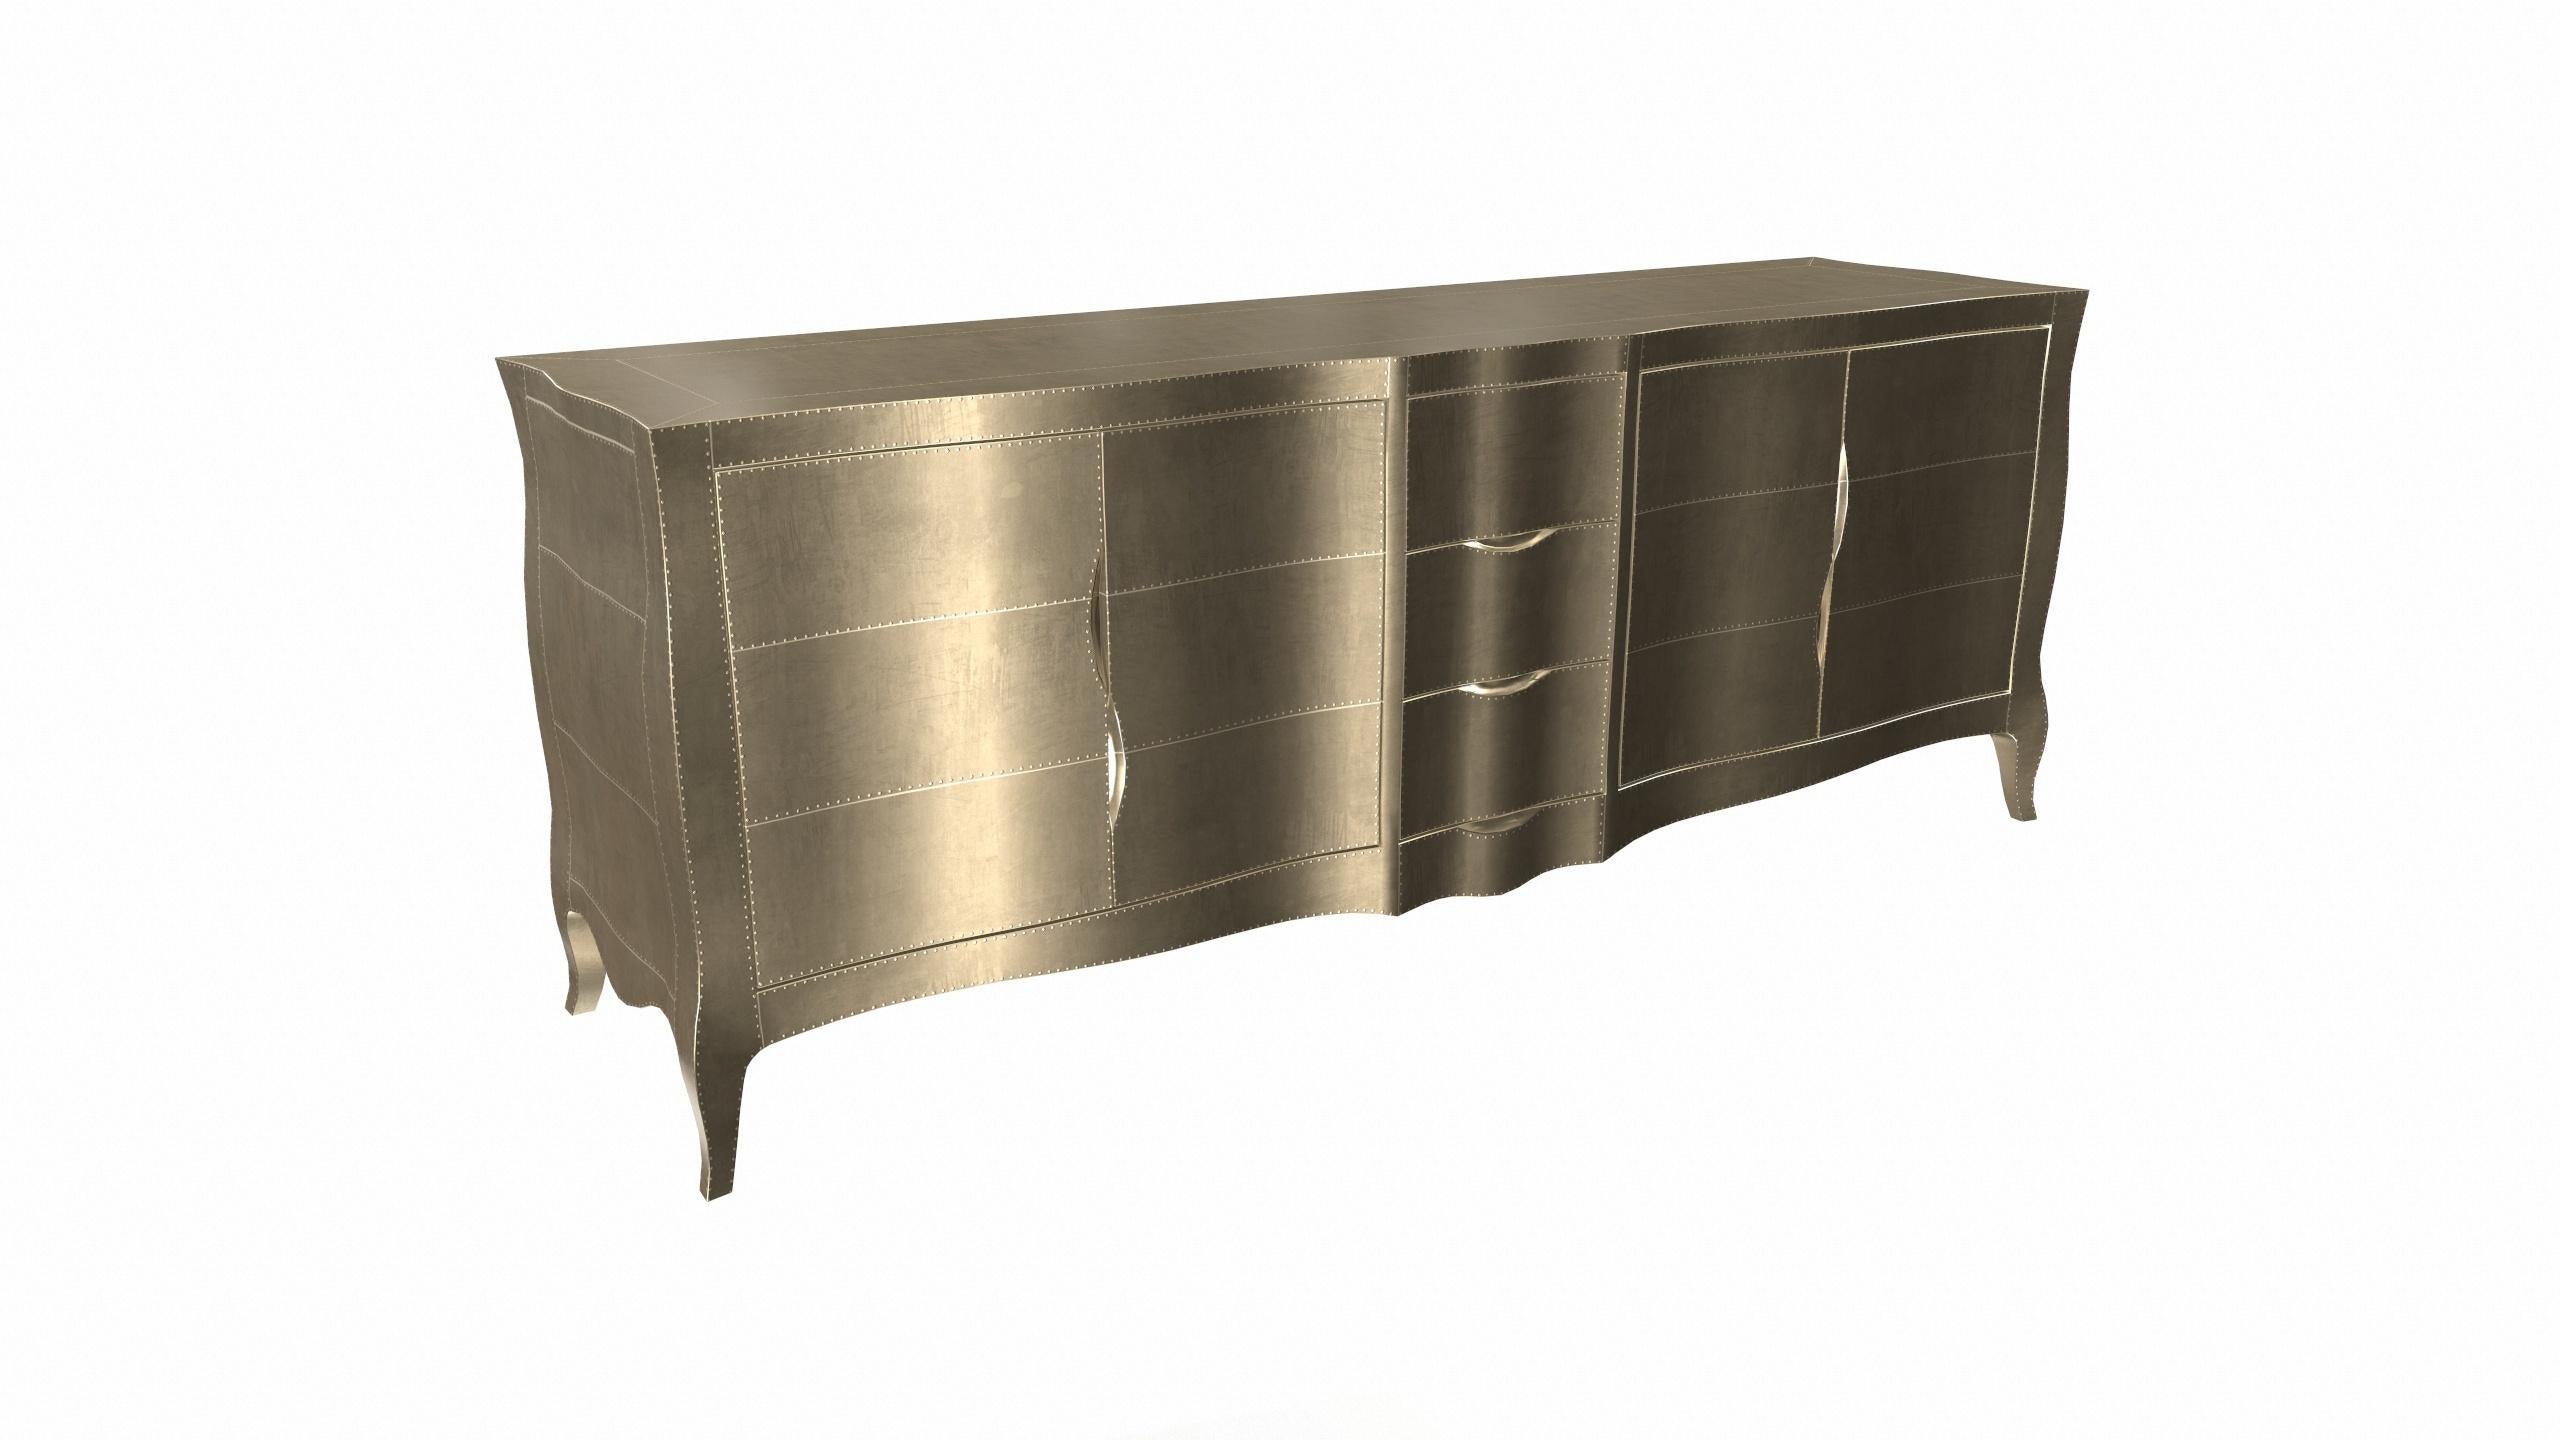 Contemporary Louise Credenza Art Deco Bookcases in Smooth Brass by Paul Mathieu For Sale